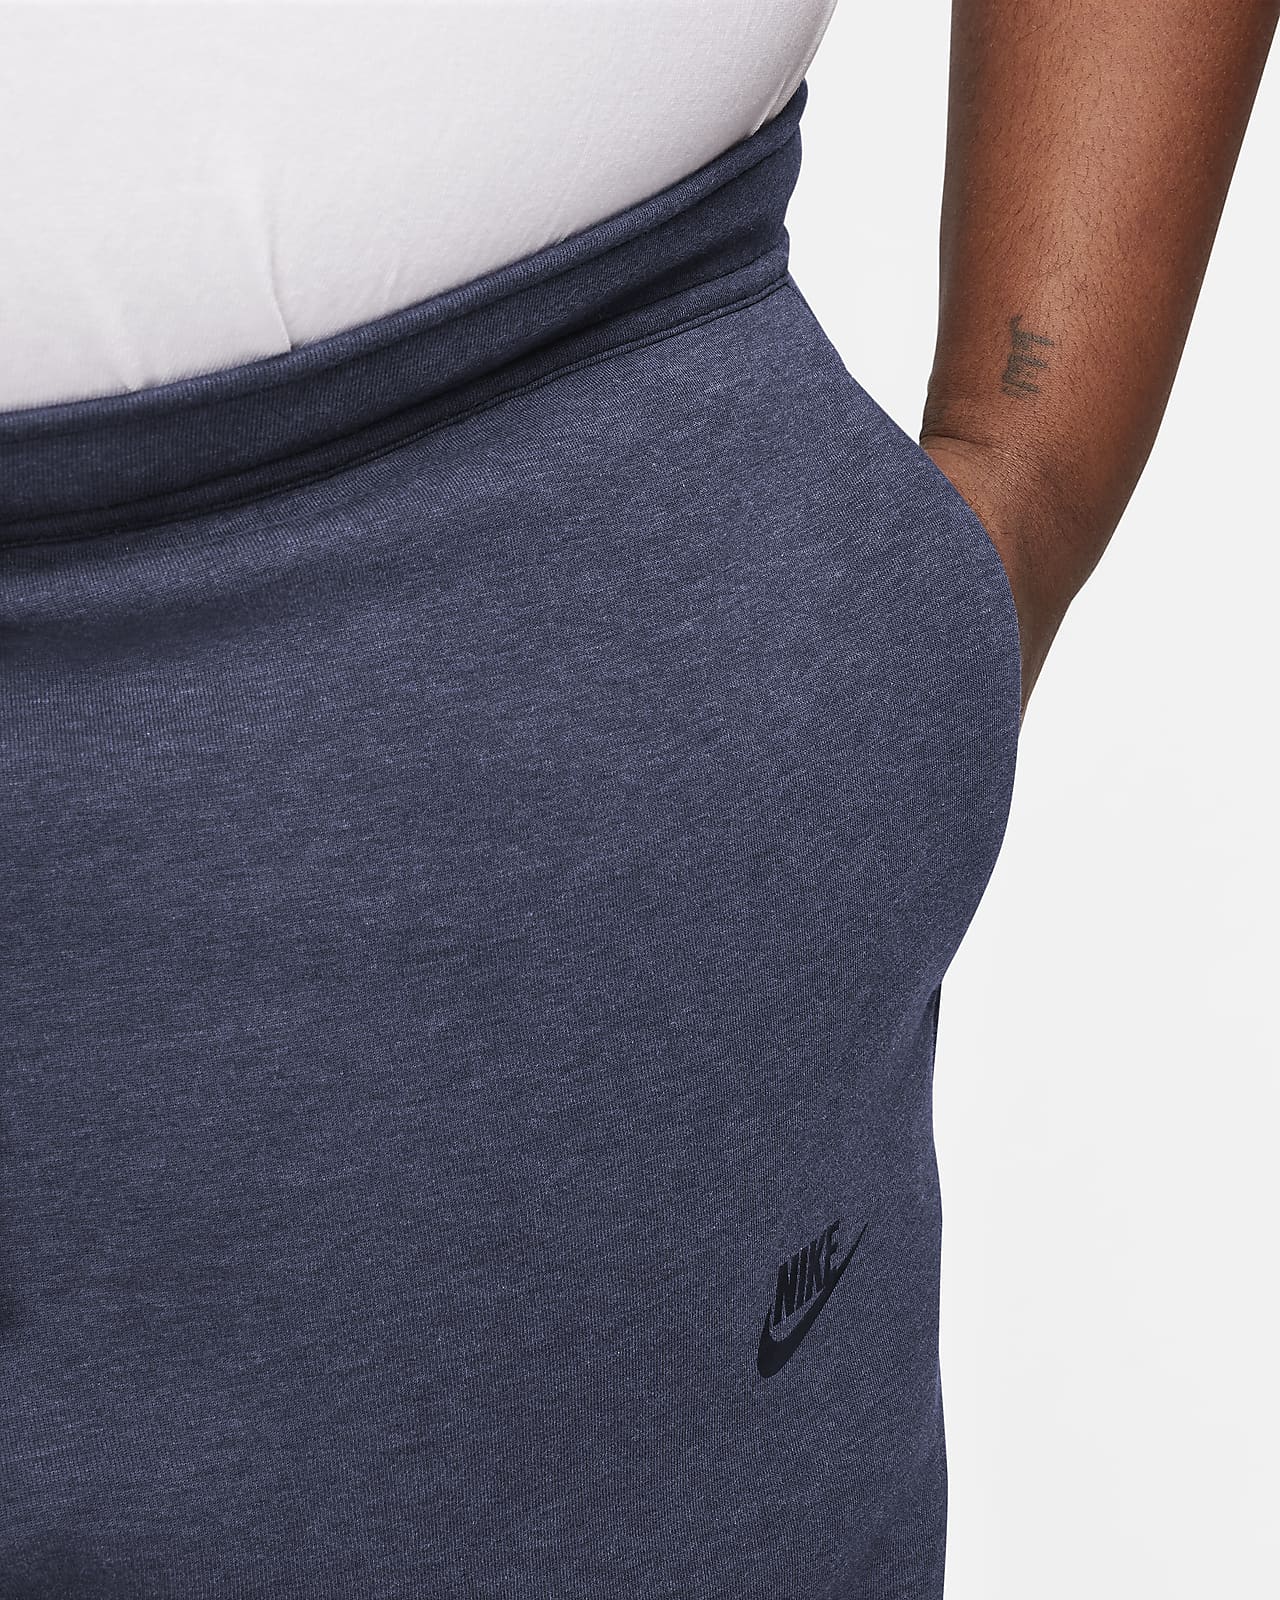 Get to know the latest addition to our pant lineup: the Cloud Pant